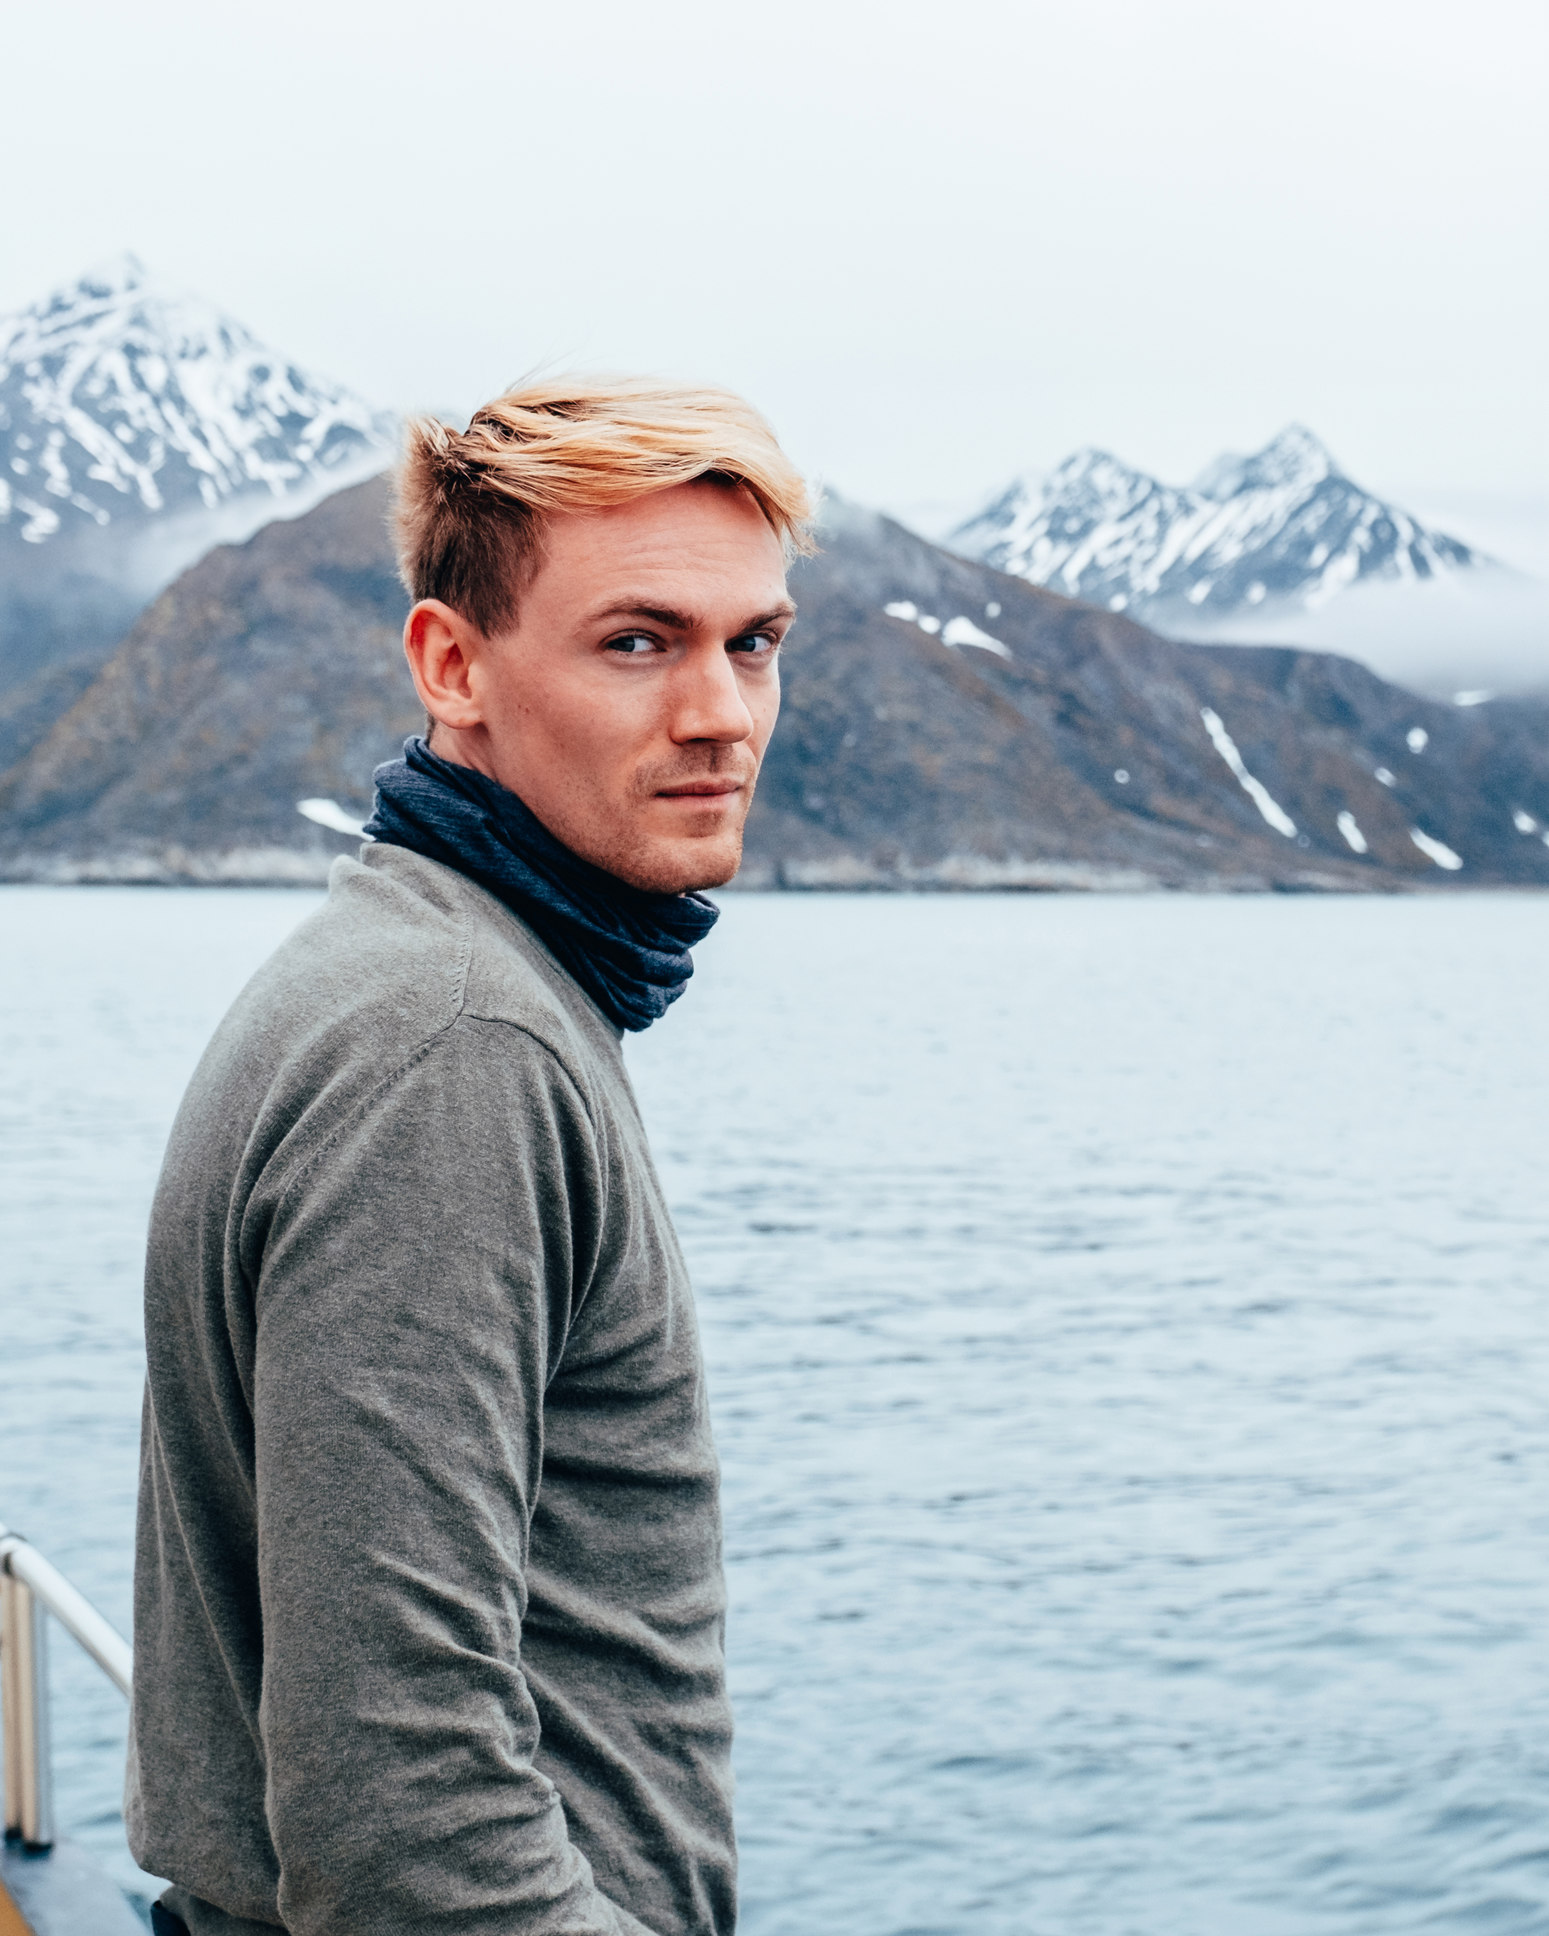 Portrait of a man on a boat in norway